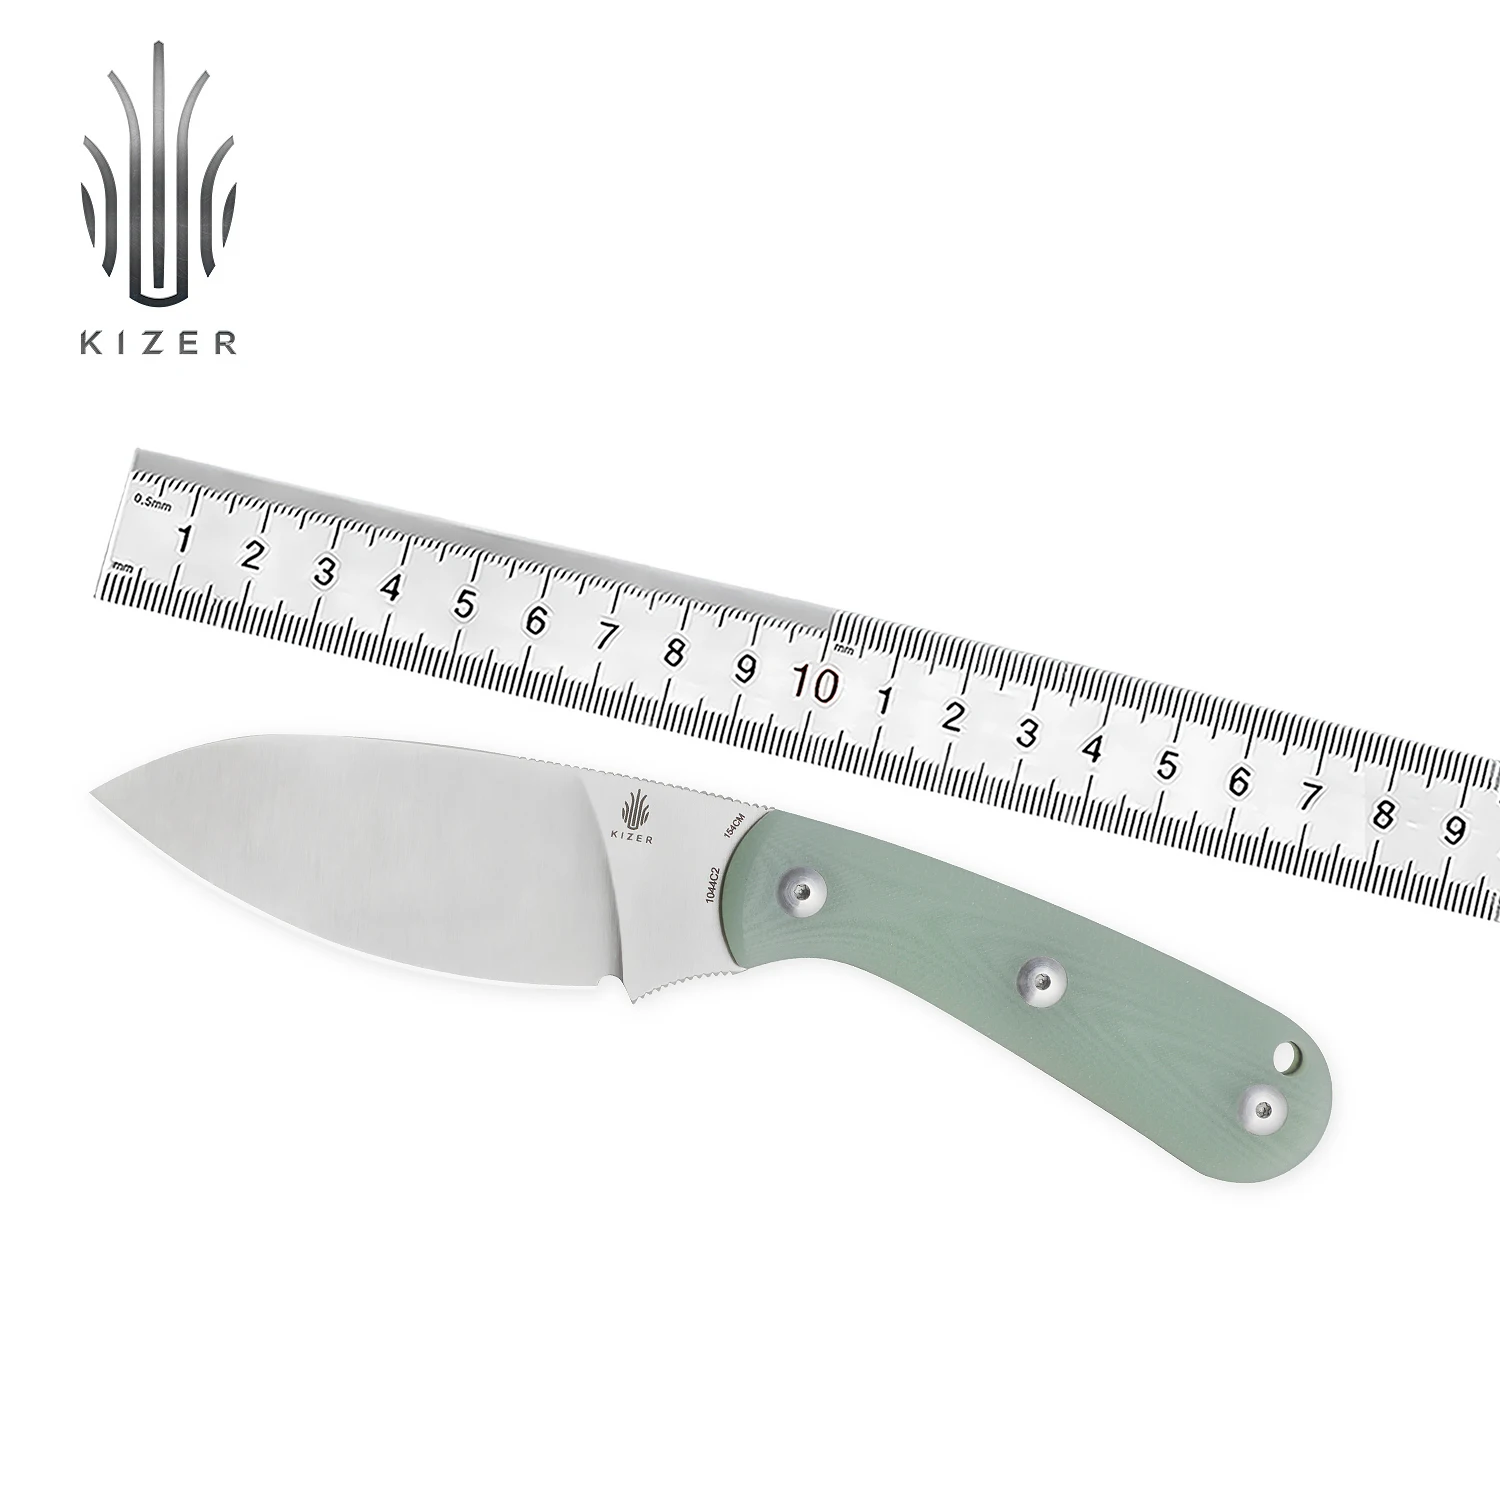 Kizer Fixed Blade Knife Baby 1044C2 Outdoor Hunting Survival Knife G10 Handle 154CM Durable Steel  Survival Camping Knives